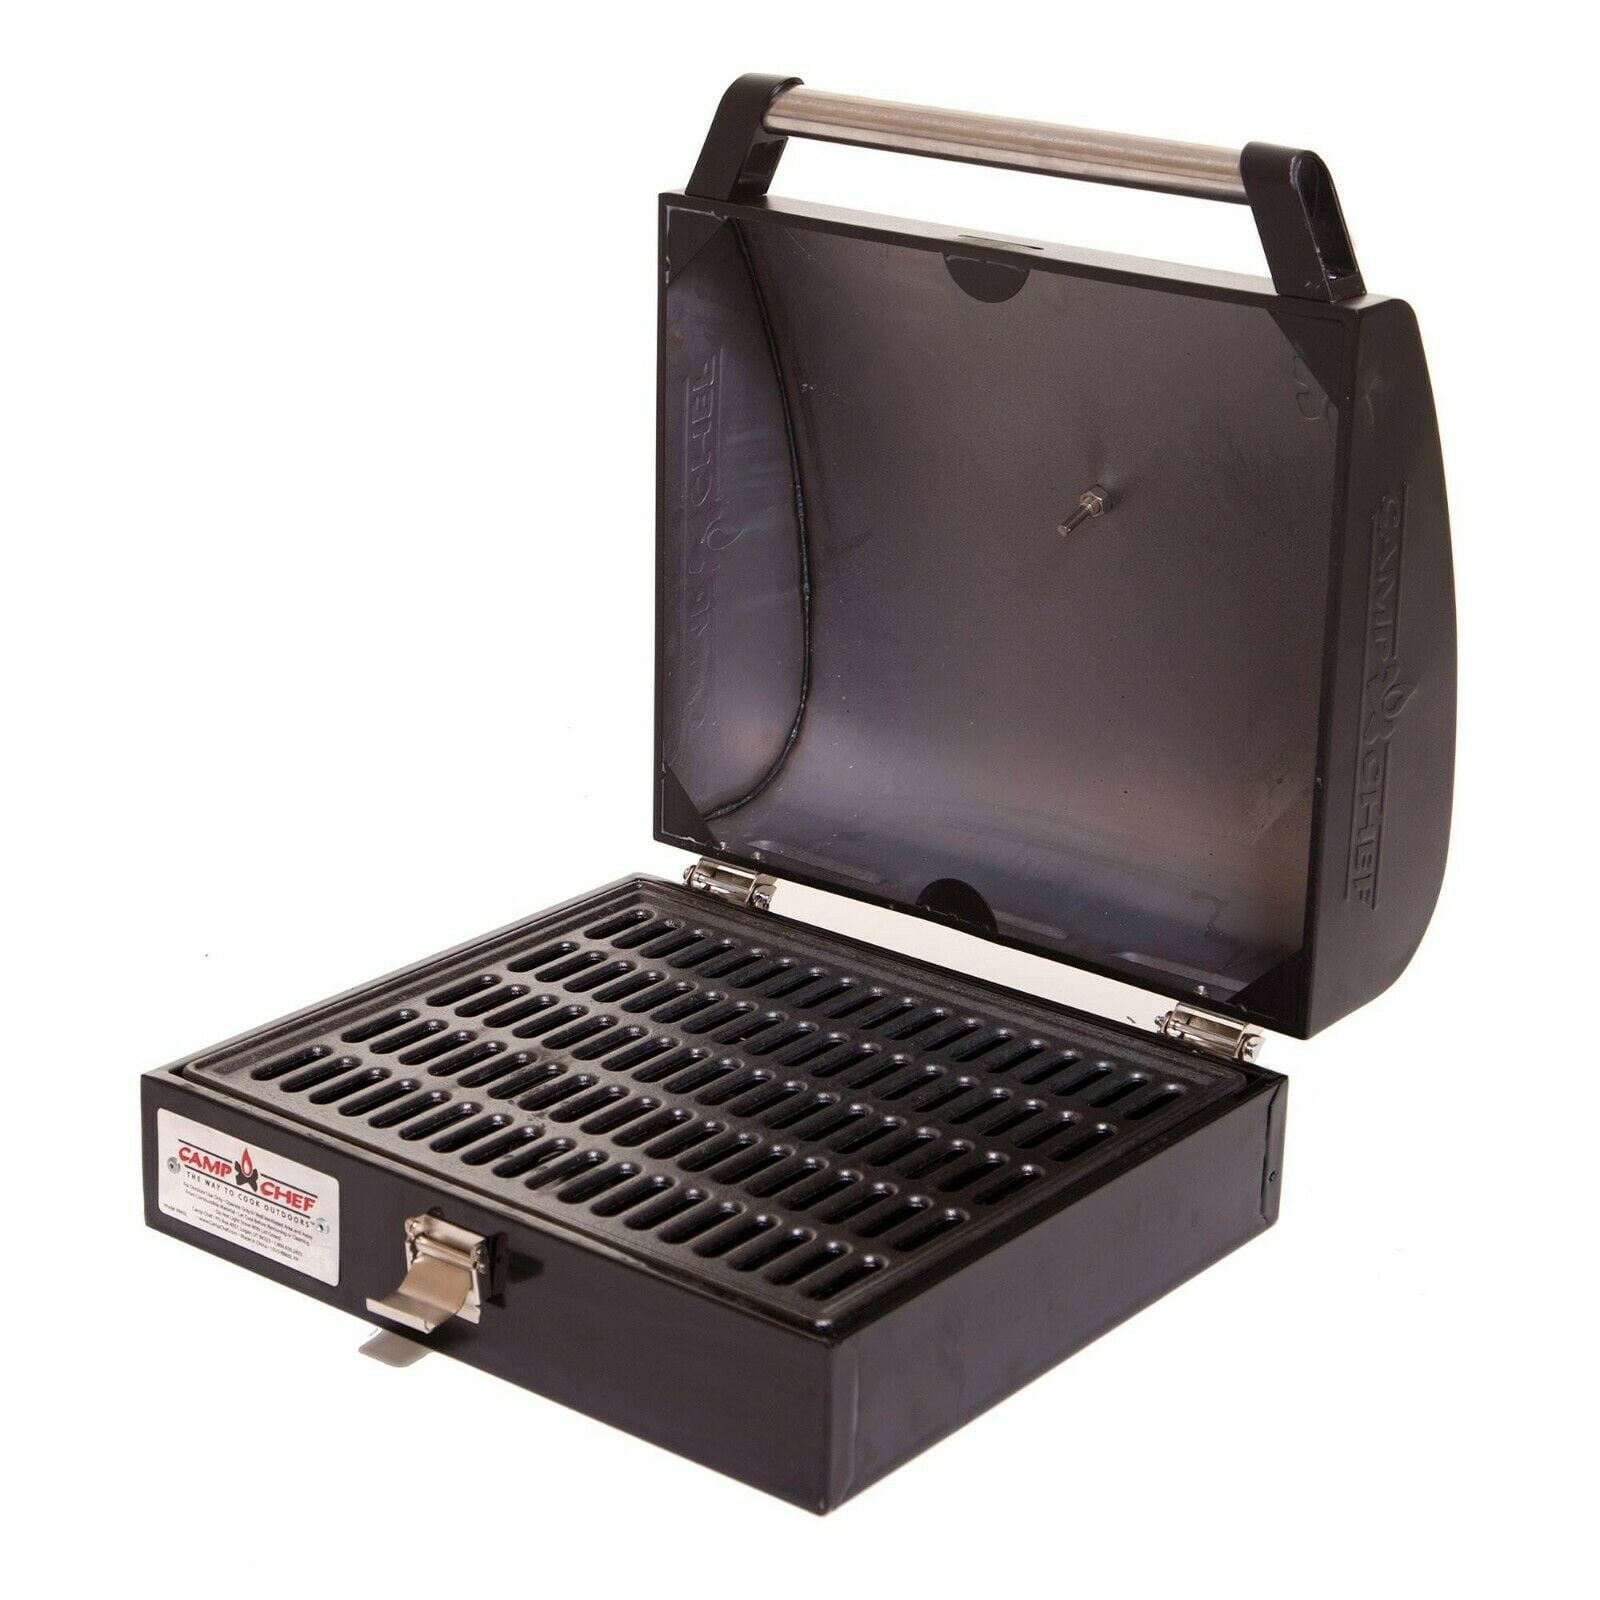 Expert Grill 13.2inch x 9.2inch Steel Barbecue Grill Tray Topper 